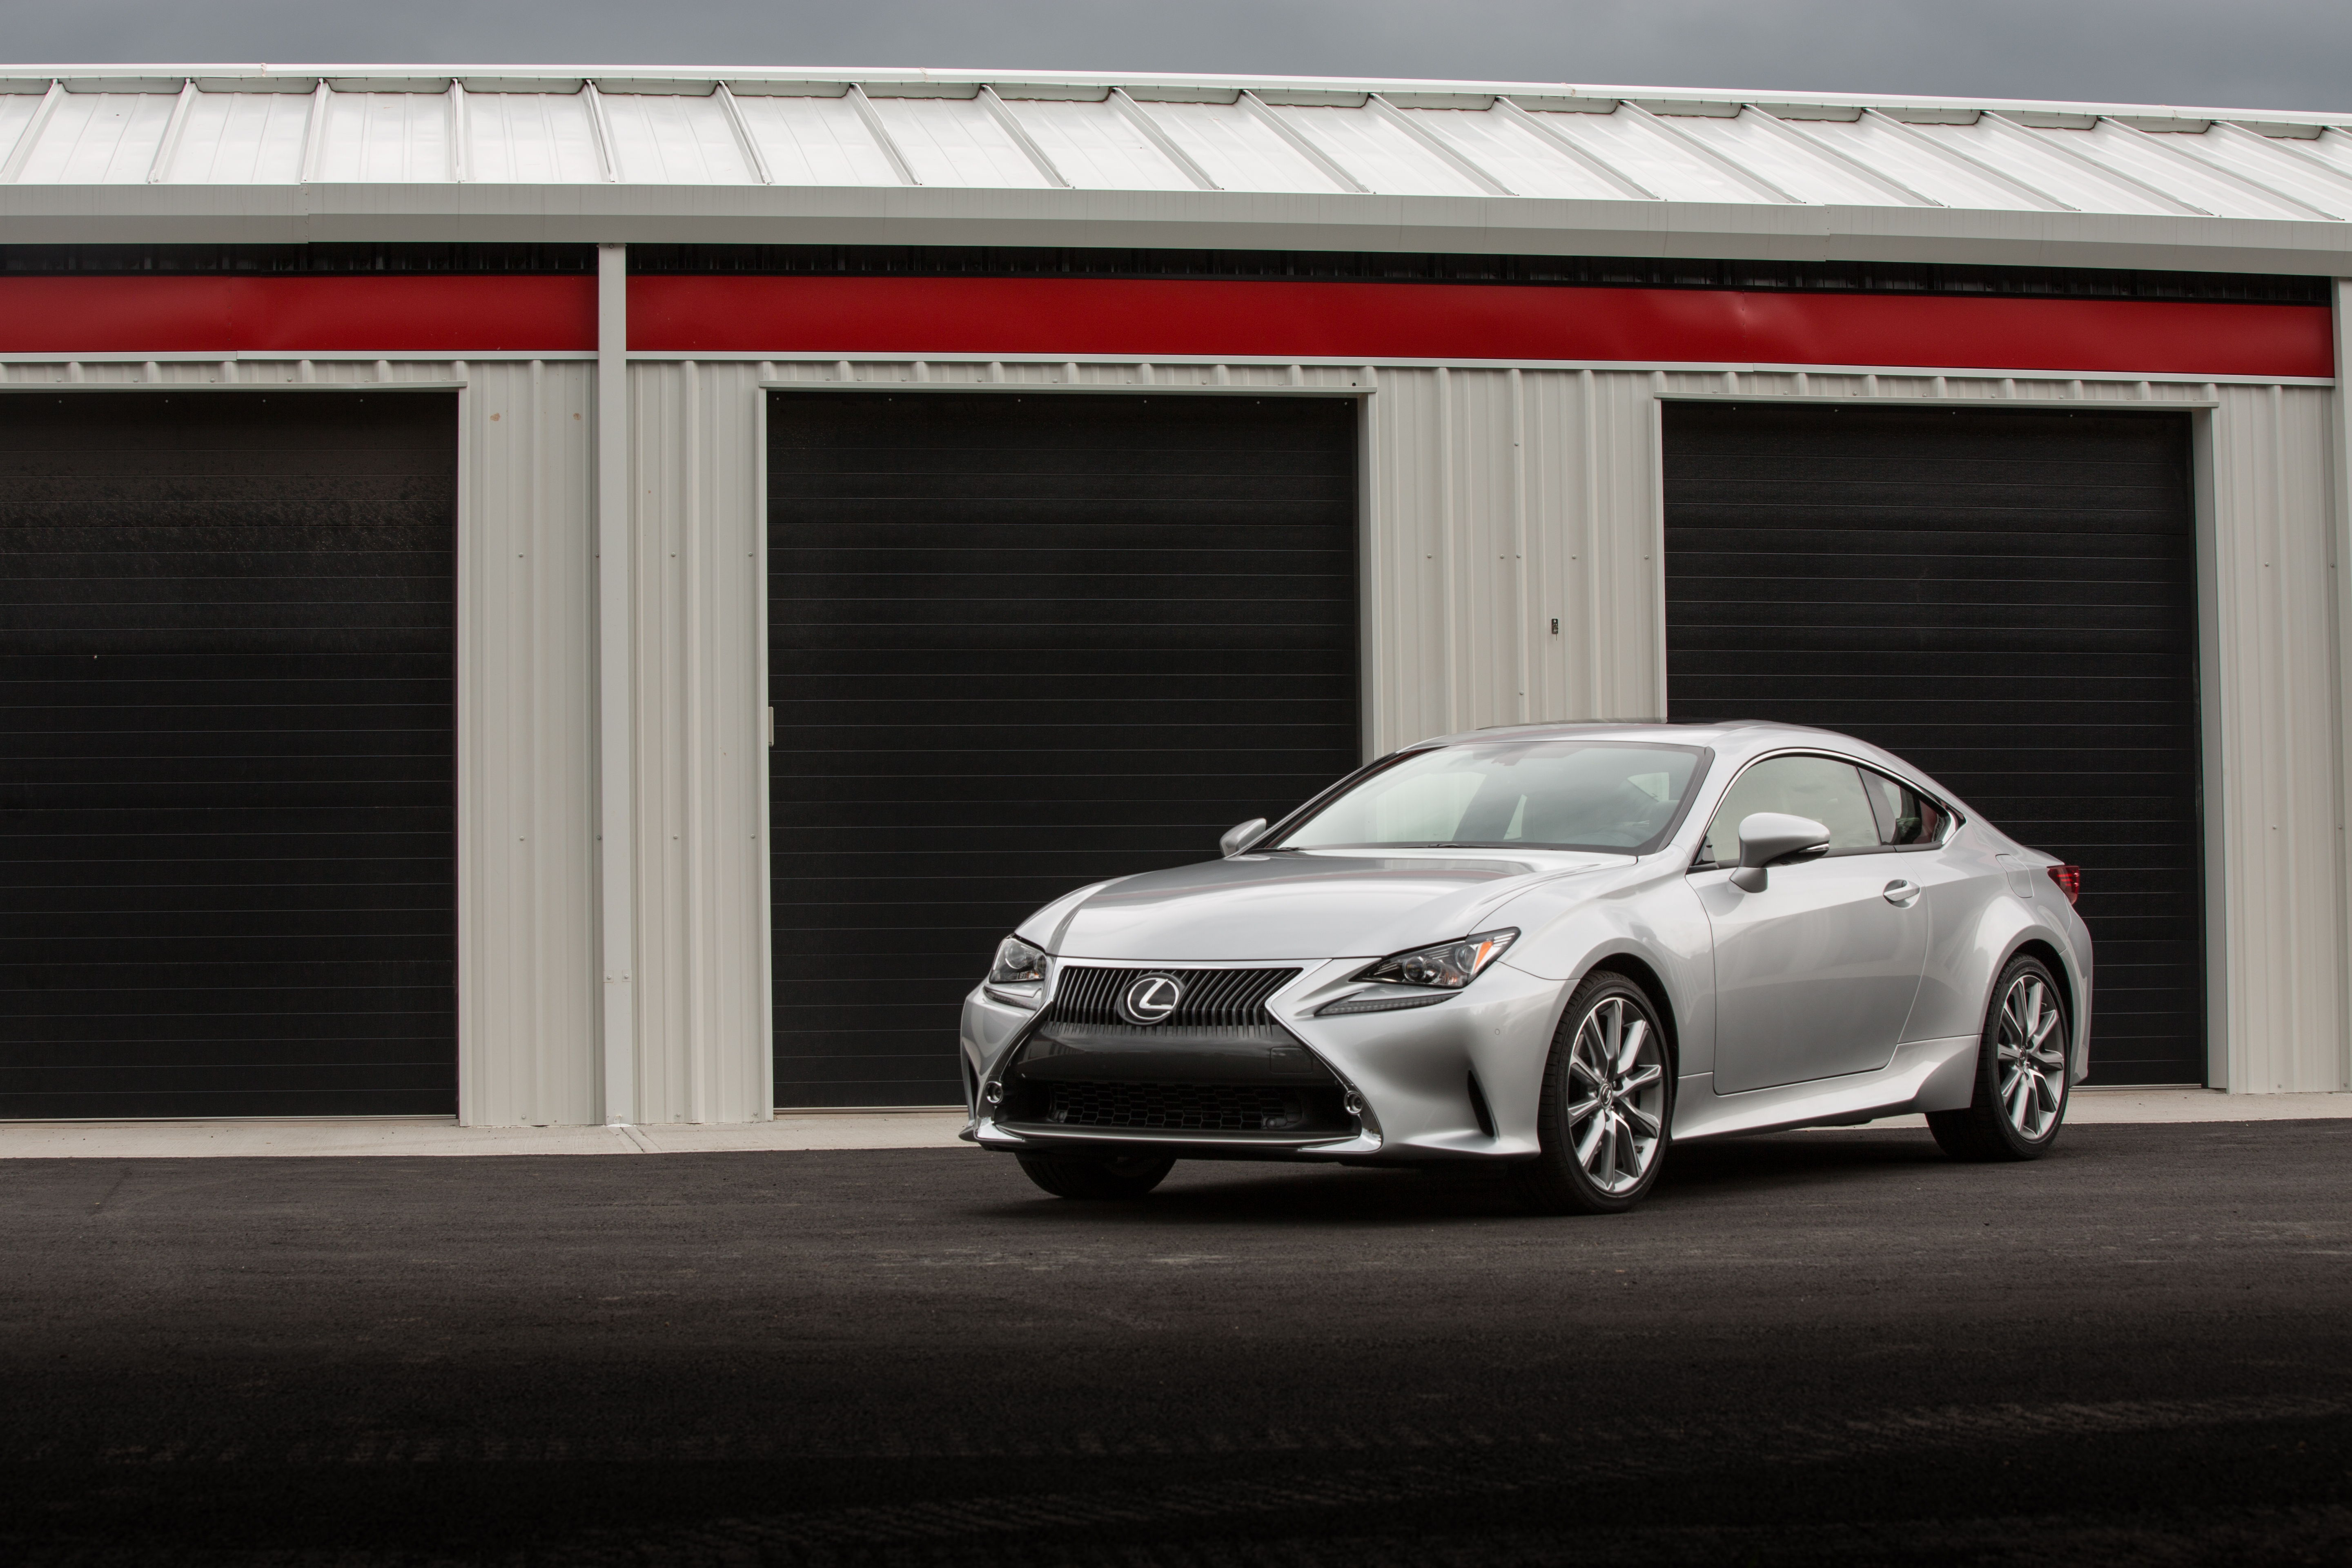 The 2016 Lexus RC Series Expands With The All-New RC 300 Model and